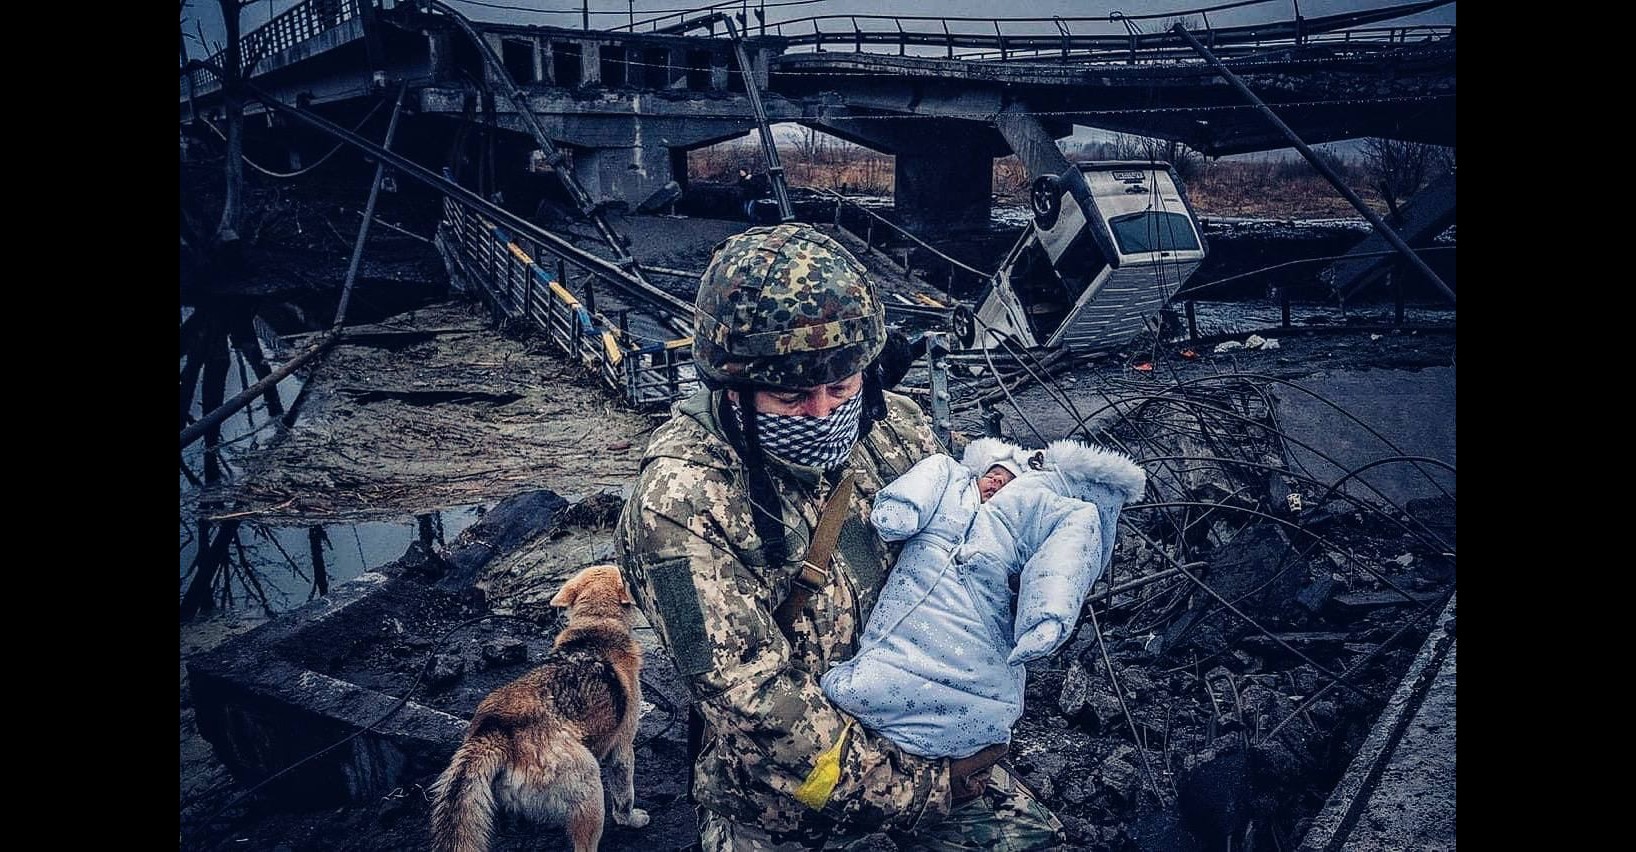 Ukrainian defender carries a baby over a river using the remains of a bridge destroyed by Russian bombardment in an area of continued Russian attacks. March 4, 2022. The Russo-Ukrainian War (2014-present). Credit: Ukrainian Freedom